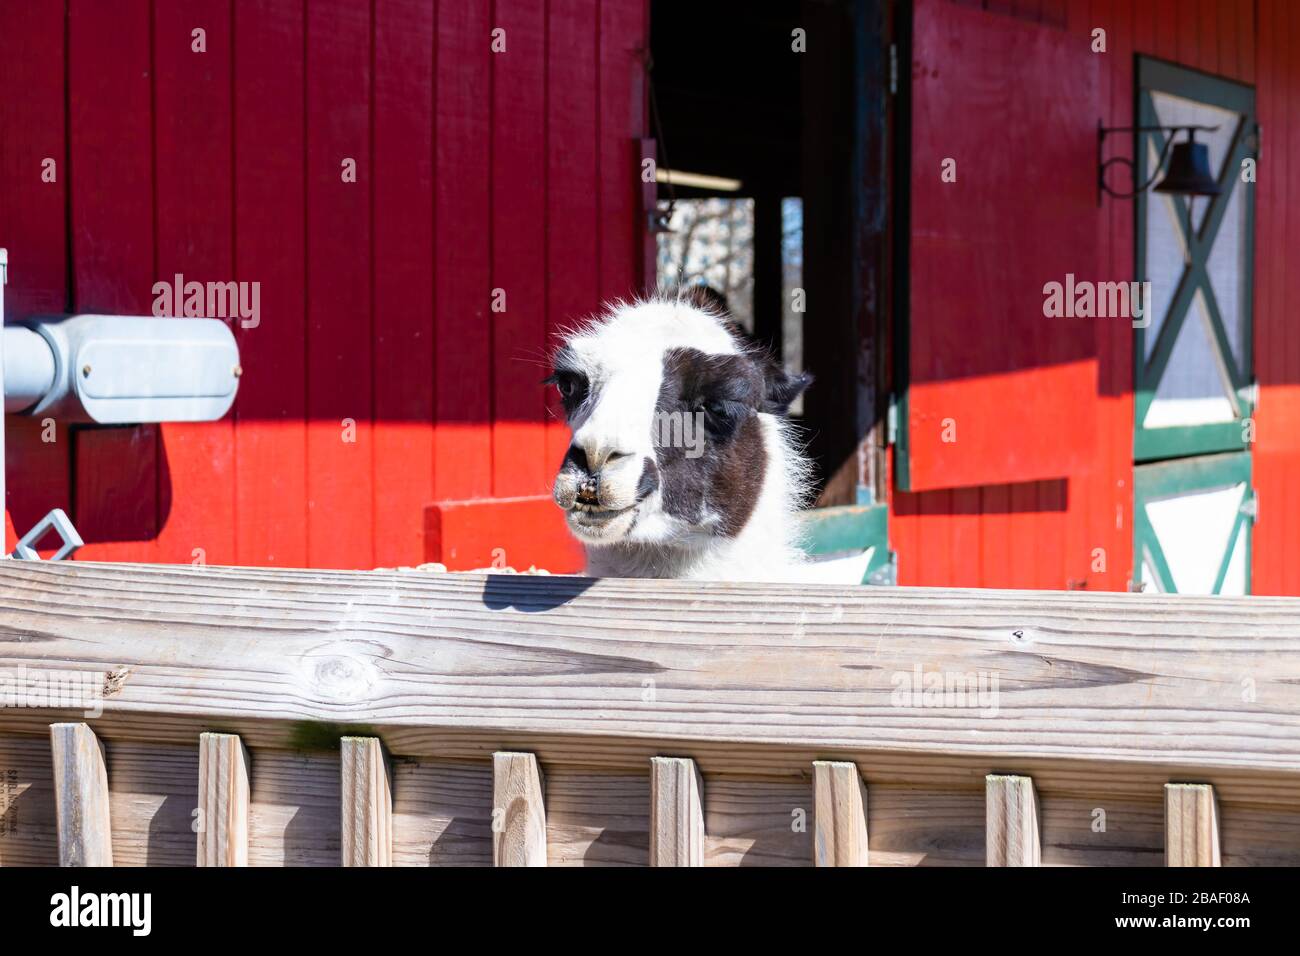 Hampton, Virginia/USA-March 1, 2020: The head of a black and white alpaca poking out from over the top of a wooden fence in Bluebird Gap Farm Park. Stock Photo